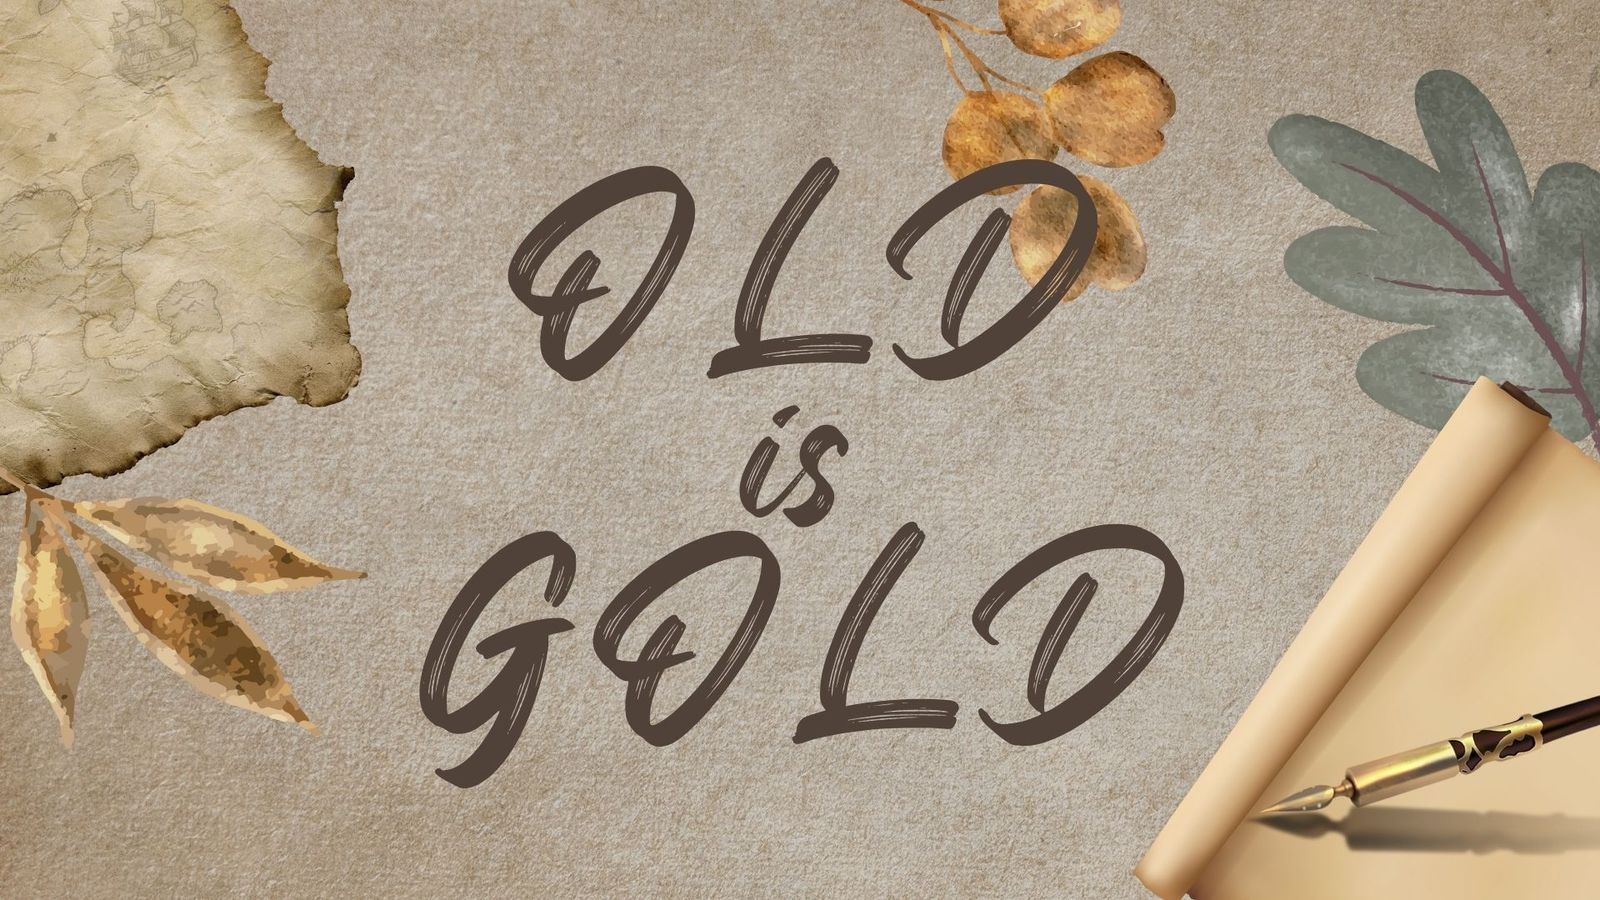 "Old is gold" Elaborates the true value of experience and not looks or material. It champions the enduring value of time-tested things, those who went through all the experience, wisdom, and stories. It's not just about vintage furniture or antique jewelry, but about appreciating